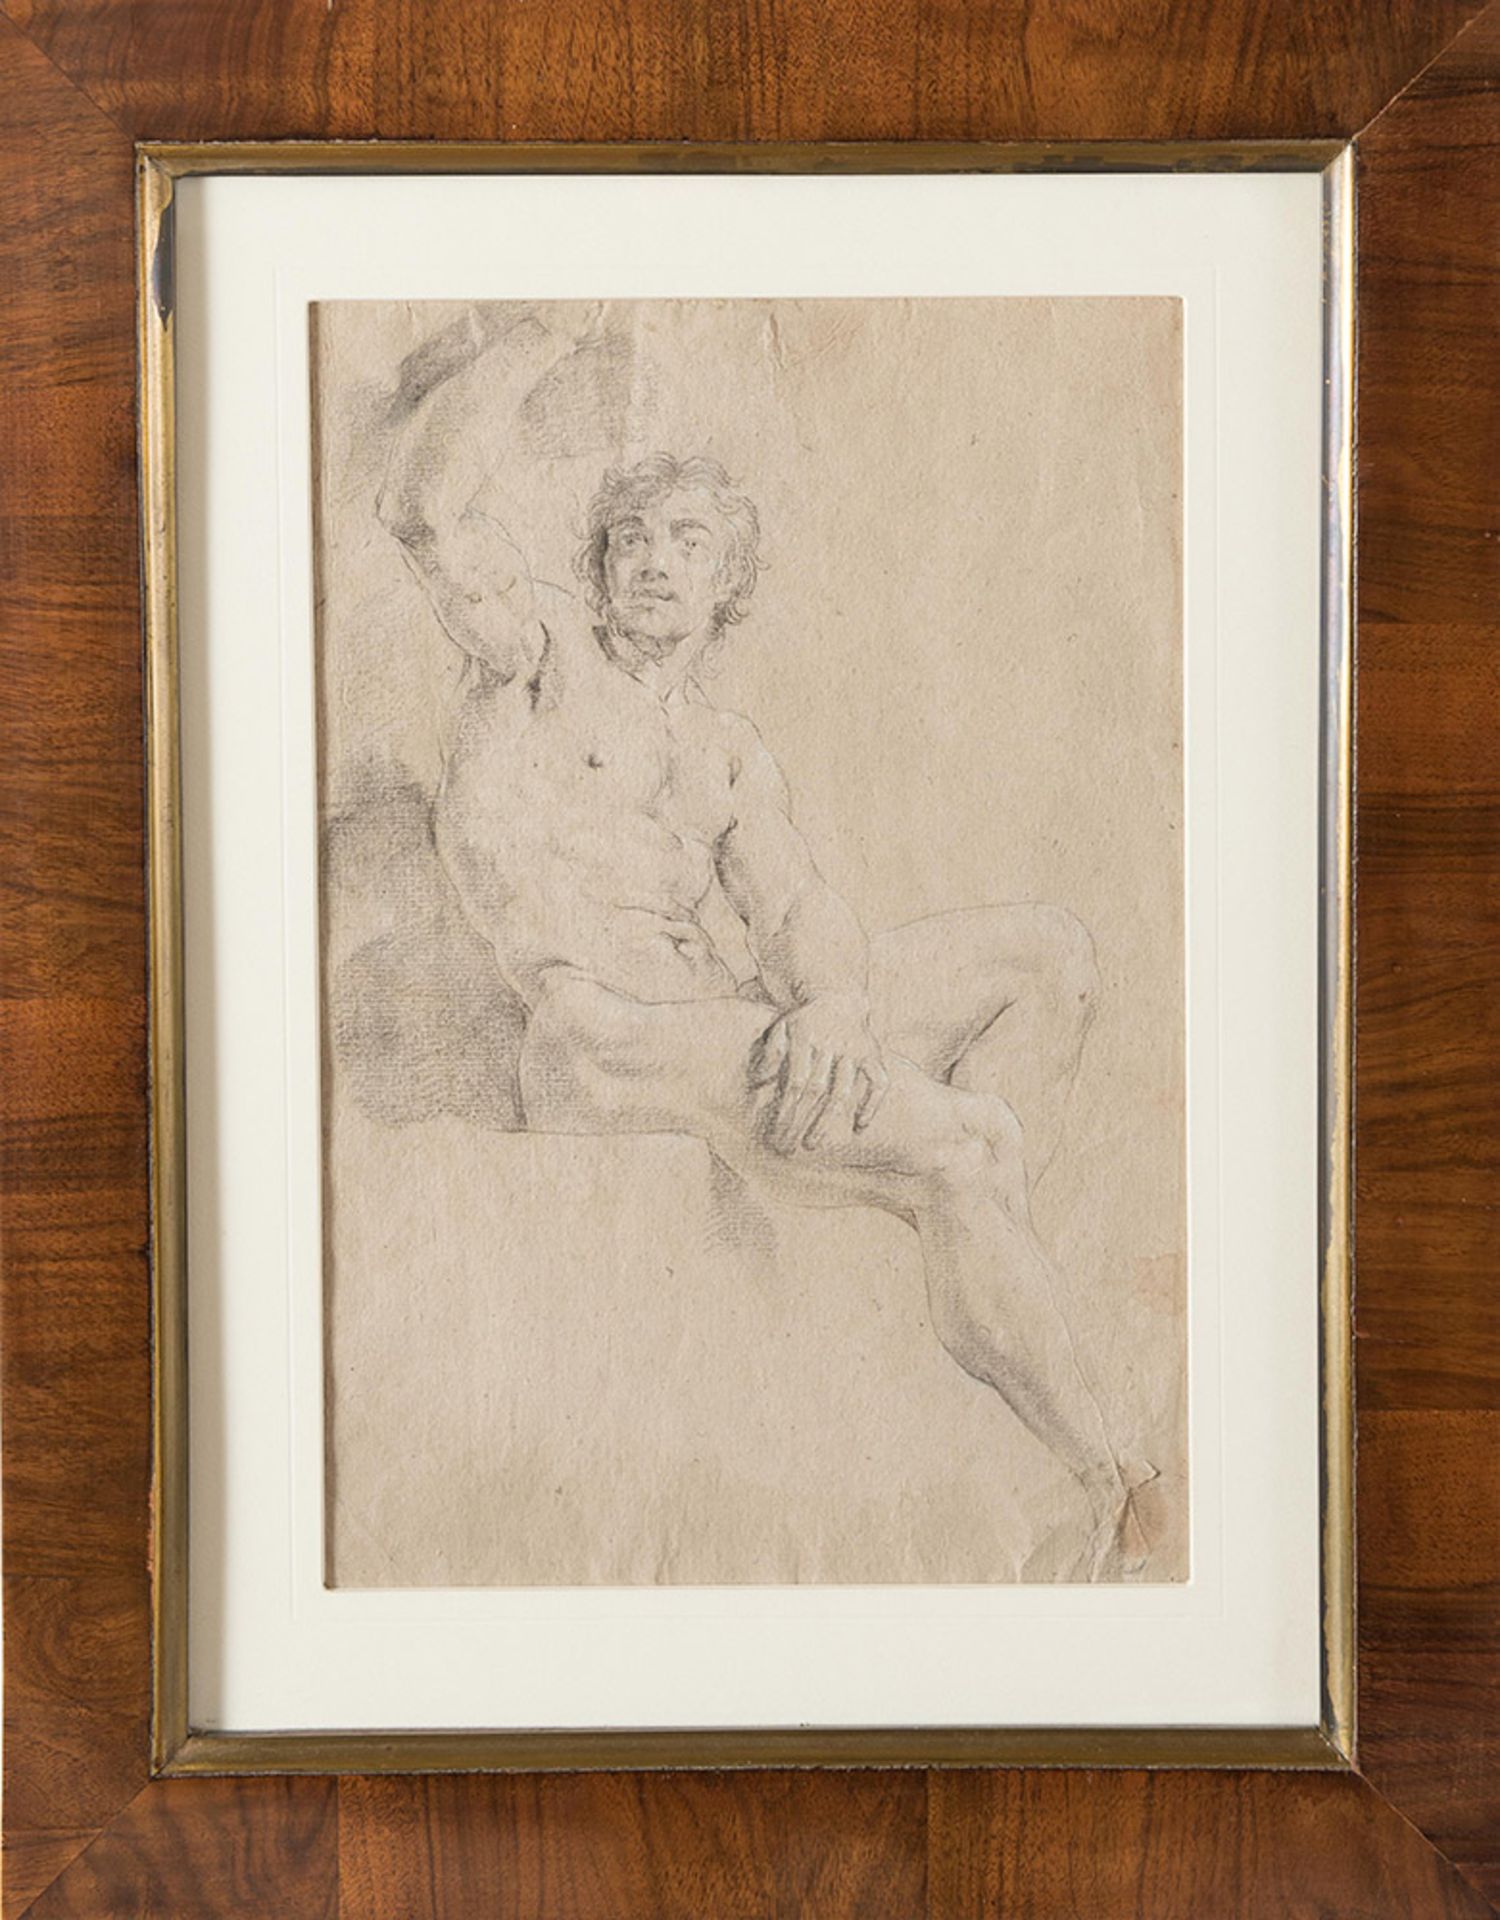 Jacopo Alessandro Calvi (Bologna 1740 – 1815), attributed to, “Nudo maschile”, drawing, H mm